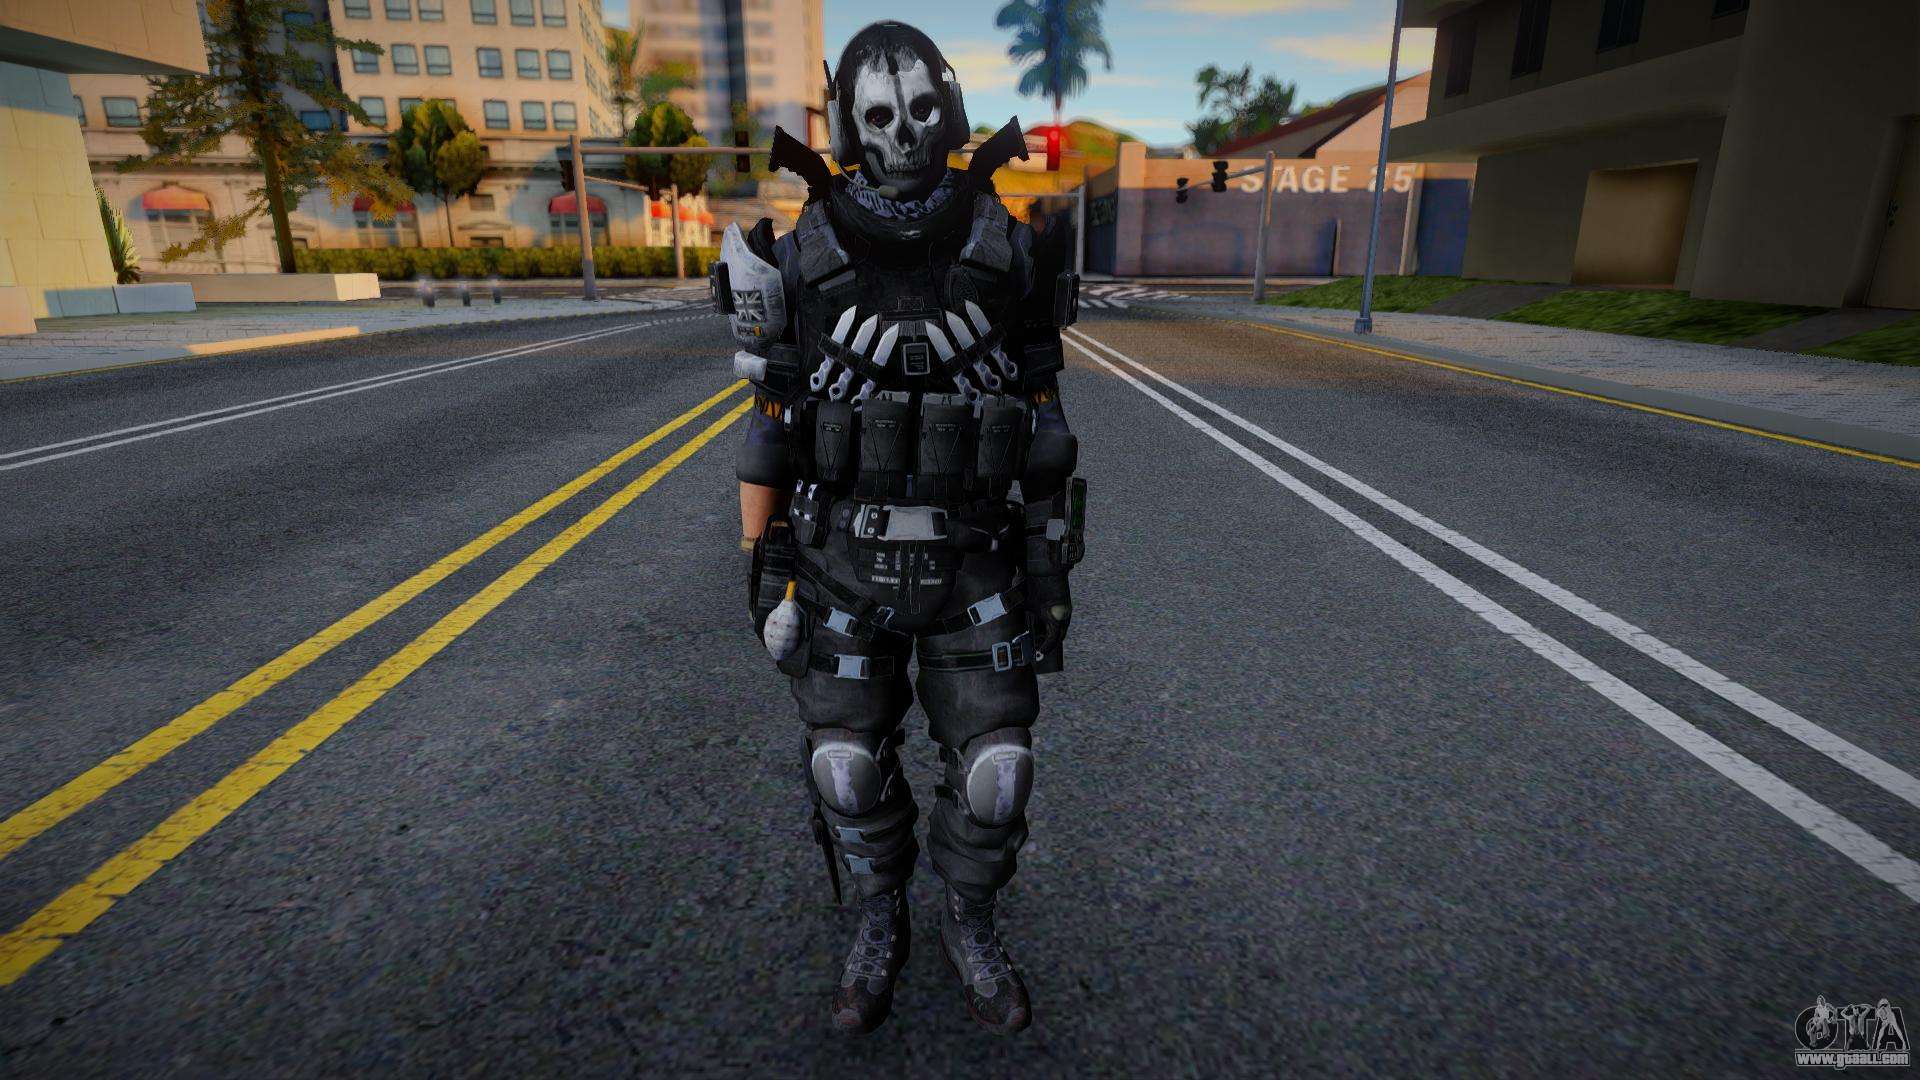 Download Skin from Call of Duty: Ghosts for GTA San Andreas (iOS, Android)